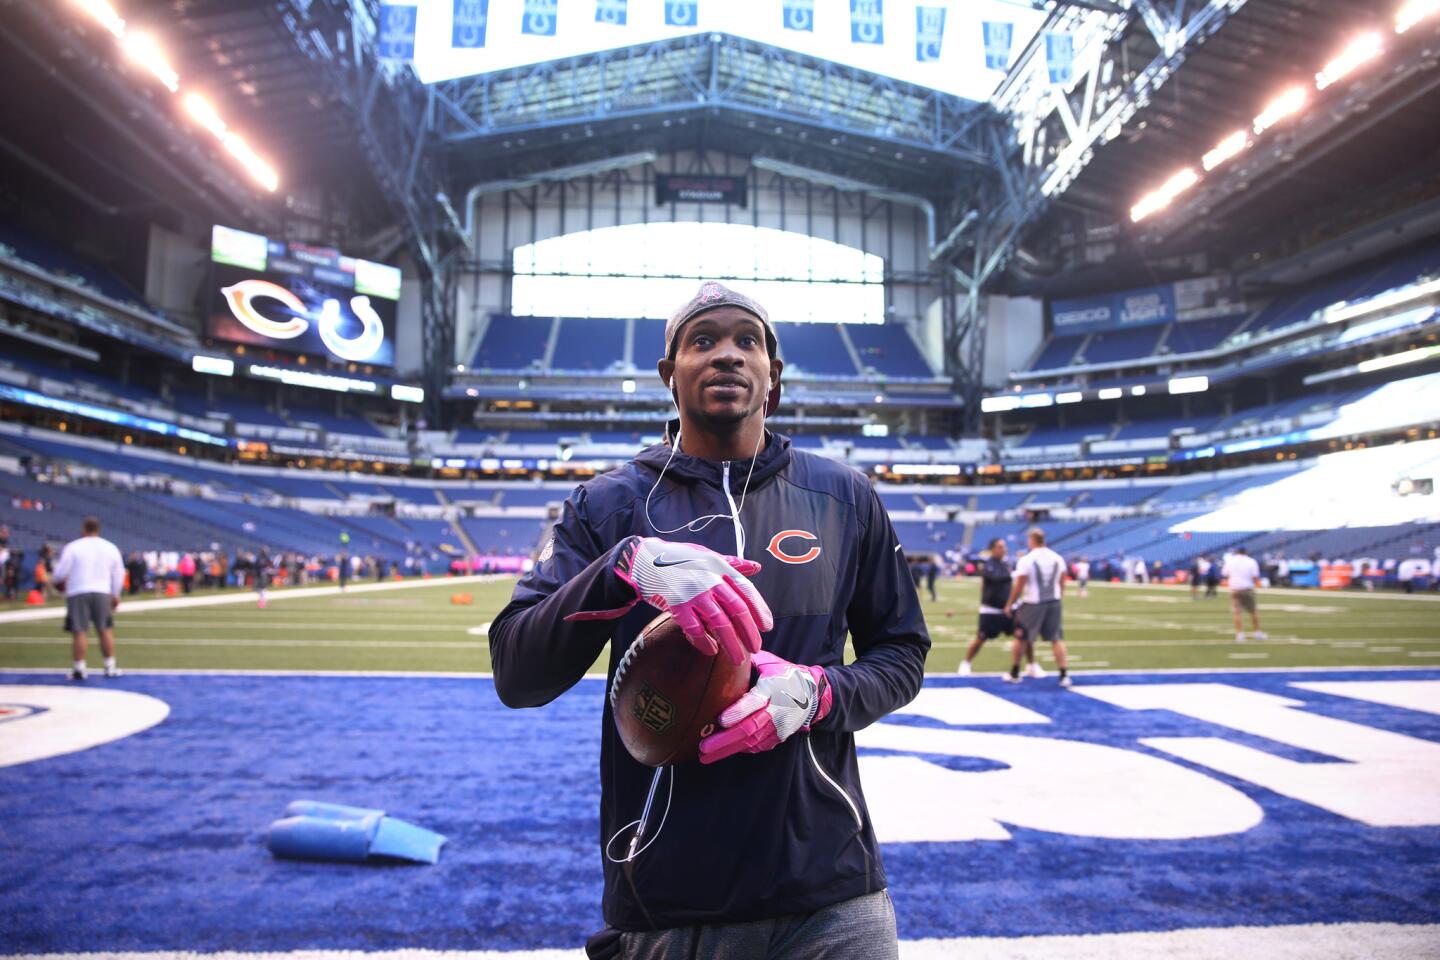 Alshon Jeffery heads to the stands to sign autographs before a game against the Colts at Lucas Oil Stadium on October 9, 2016.